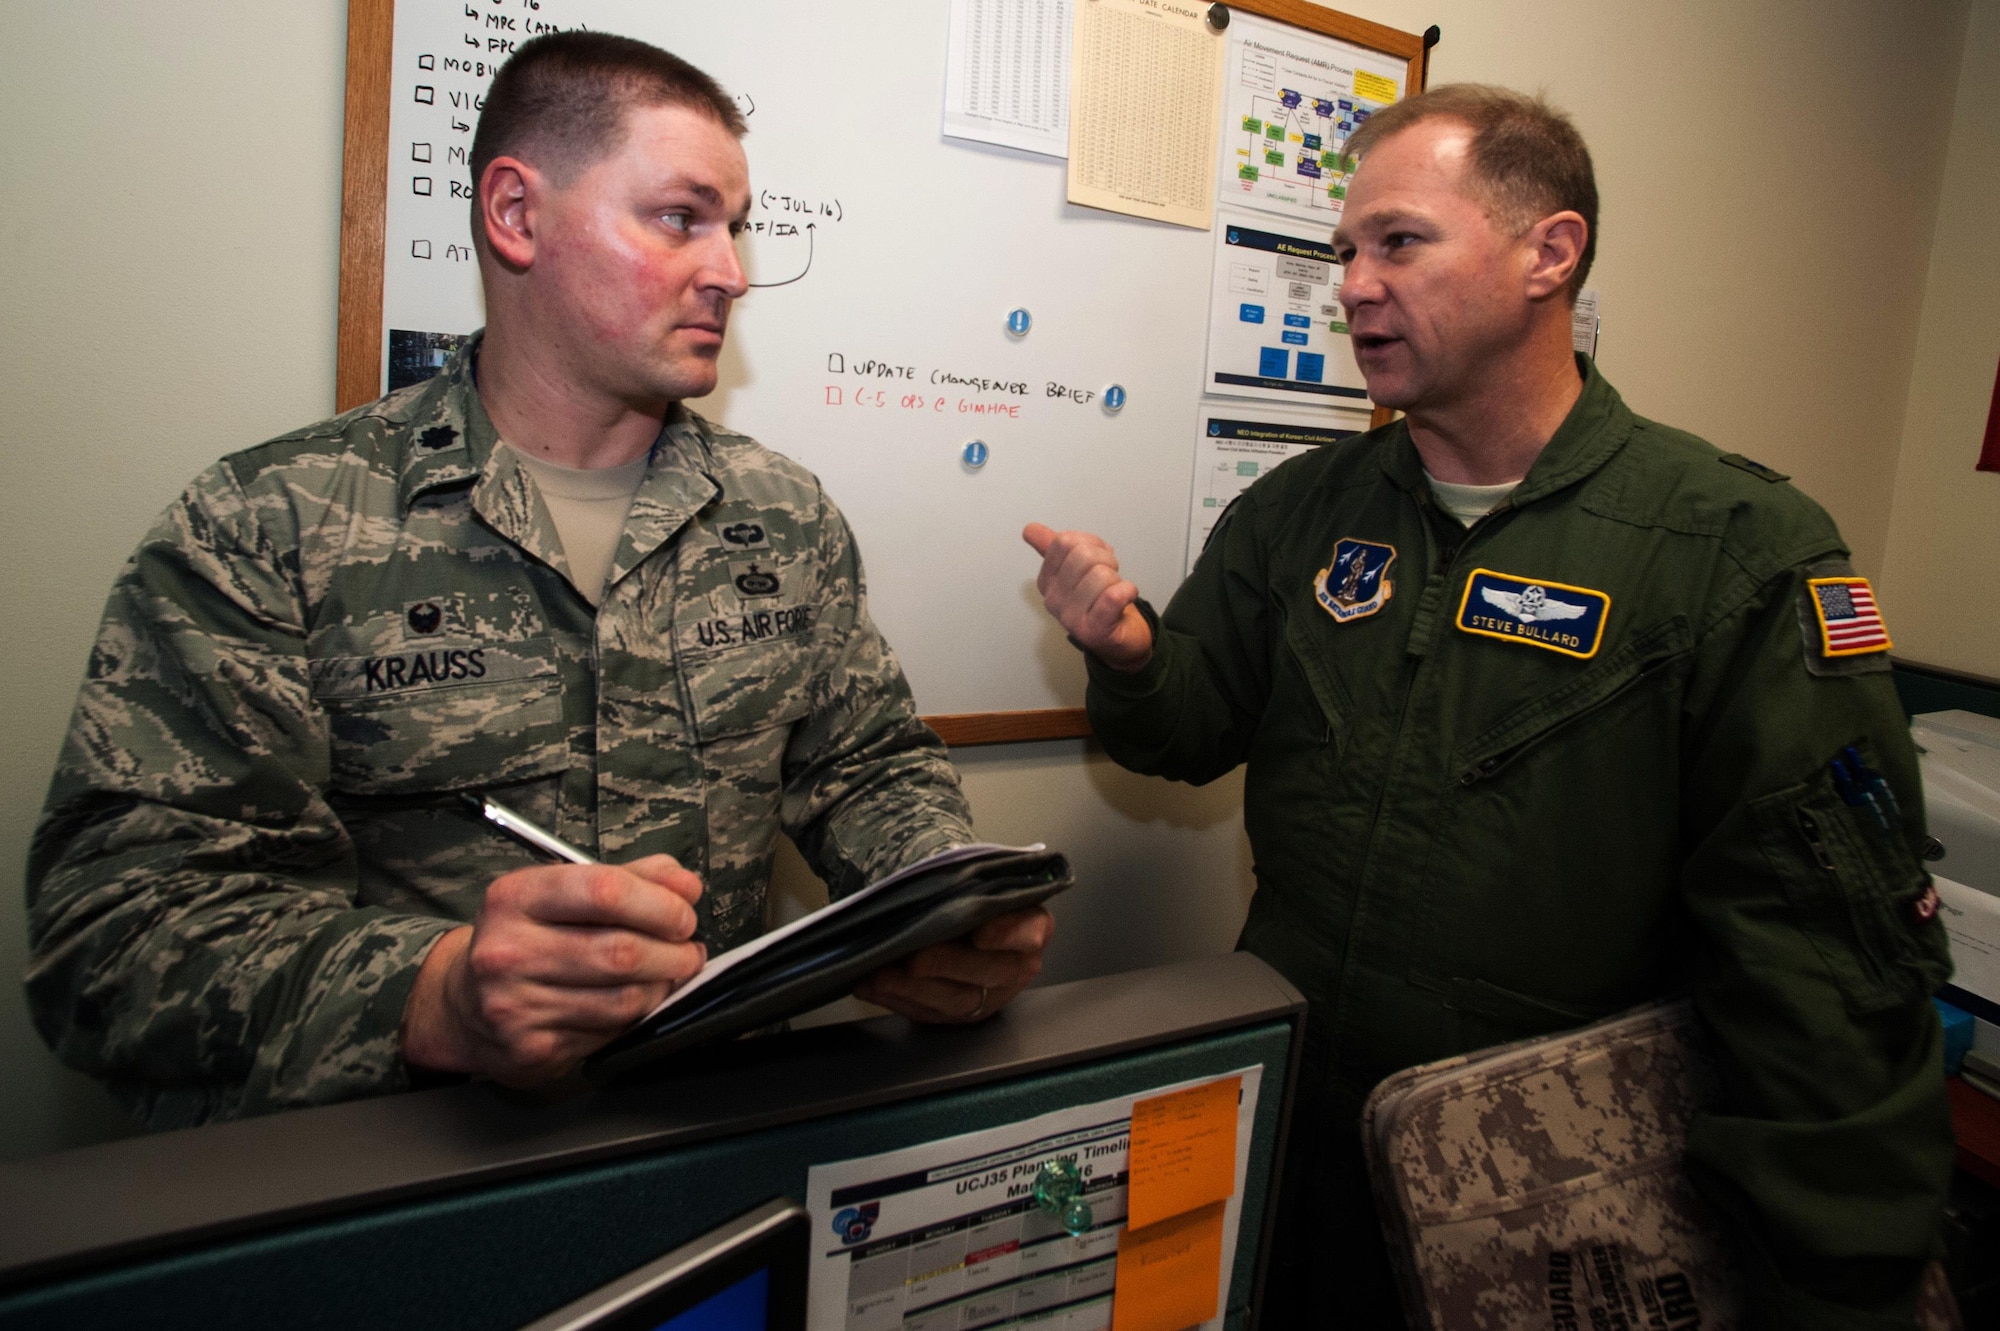 Lt. Col. Kevin Krauss, the 607th Air Mobility Division assistant director of mobility forces, takes notes as Brig. Gen. Steven Bullard, the 607th AMD director of mobility forces, discusses potential airlift operations during exercise Key Resolve 16 at Osan Air Base, South Korea, March 8, 2016. When the 607th AMD reviews airlift options, there are several safety precautions that must be evaluated before making a decision. (U.S. Air Force photo/Staff Sgt. Nick Wilson)